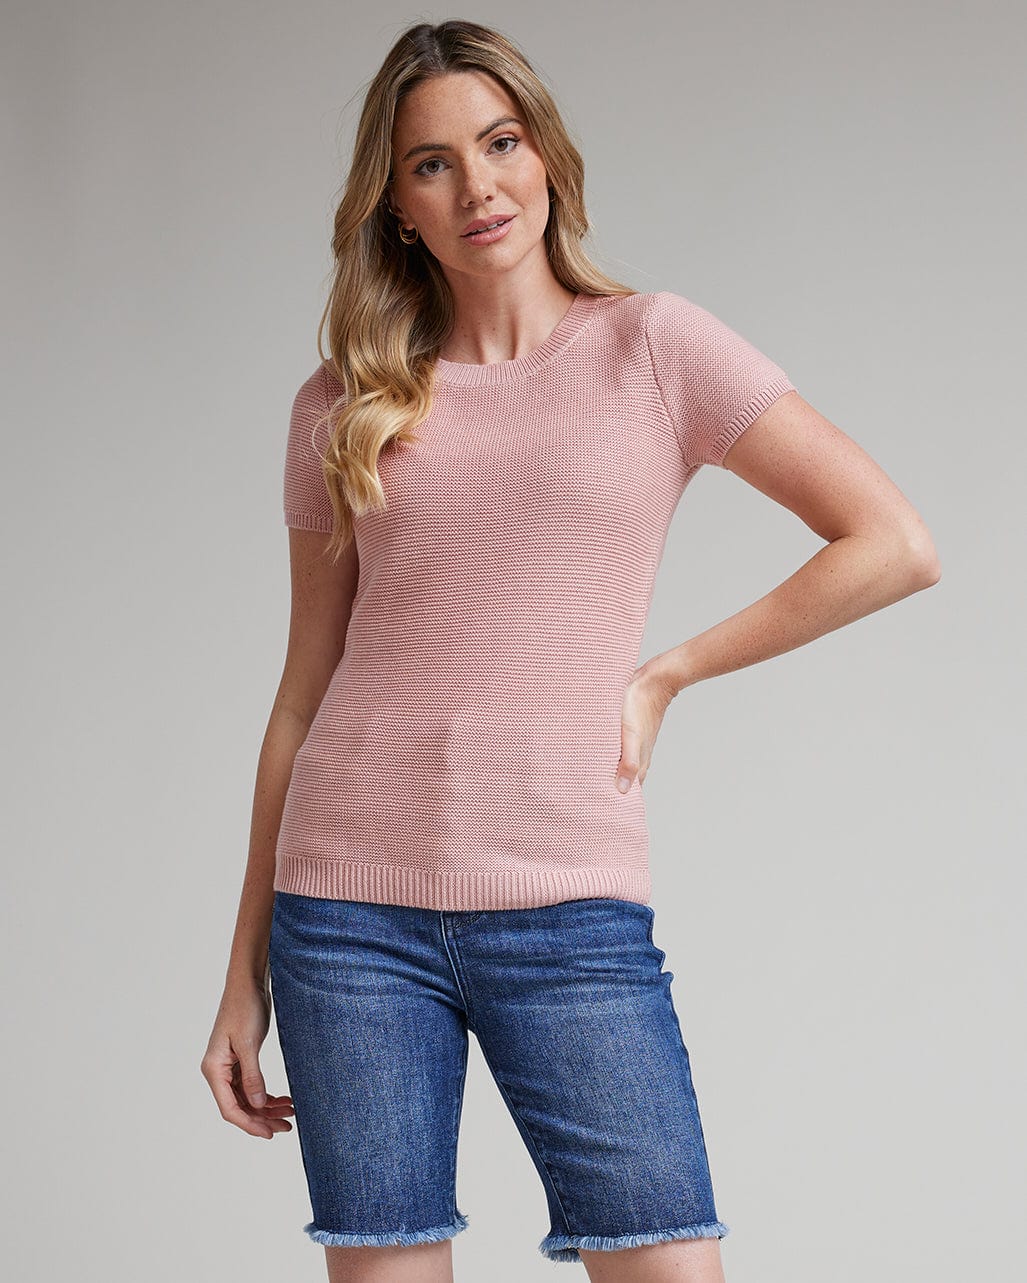 Woman in short sleeve textured sweater